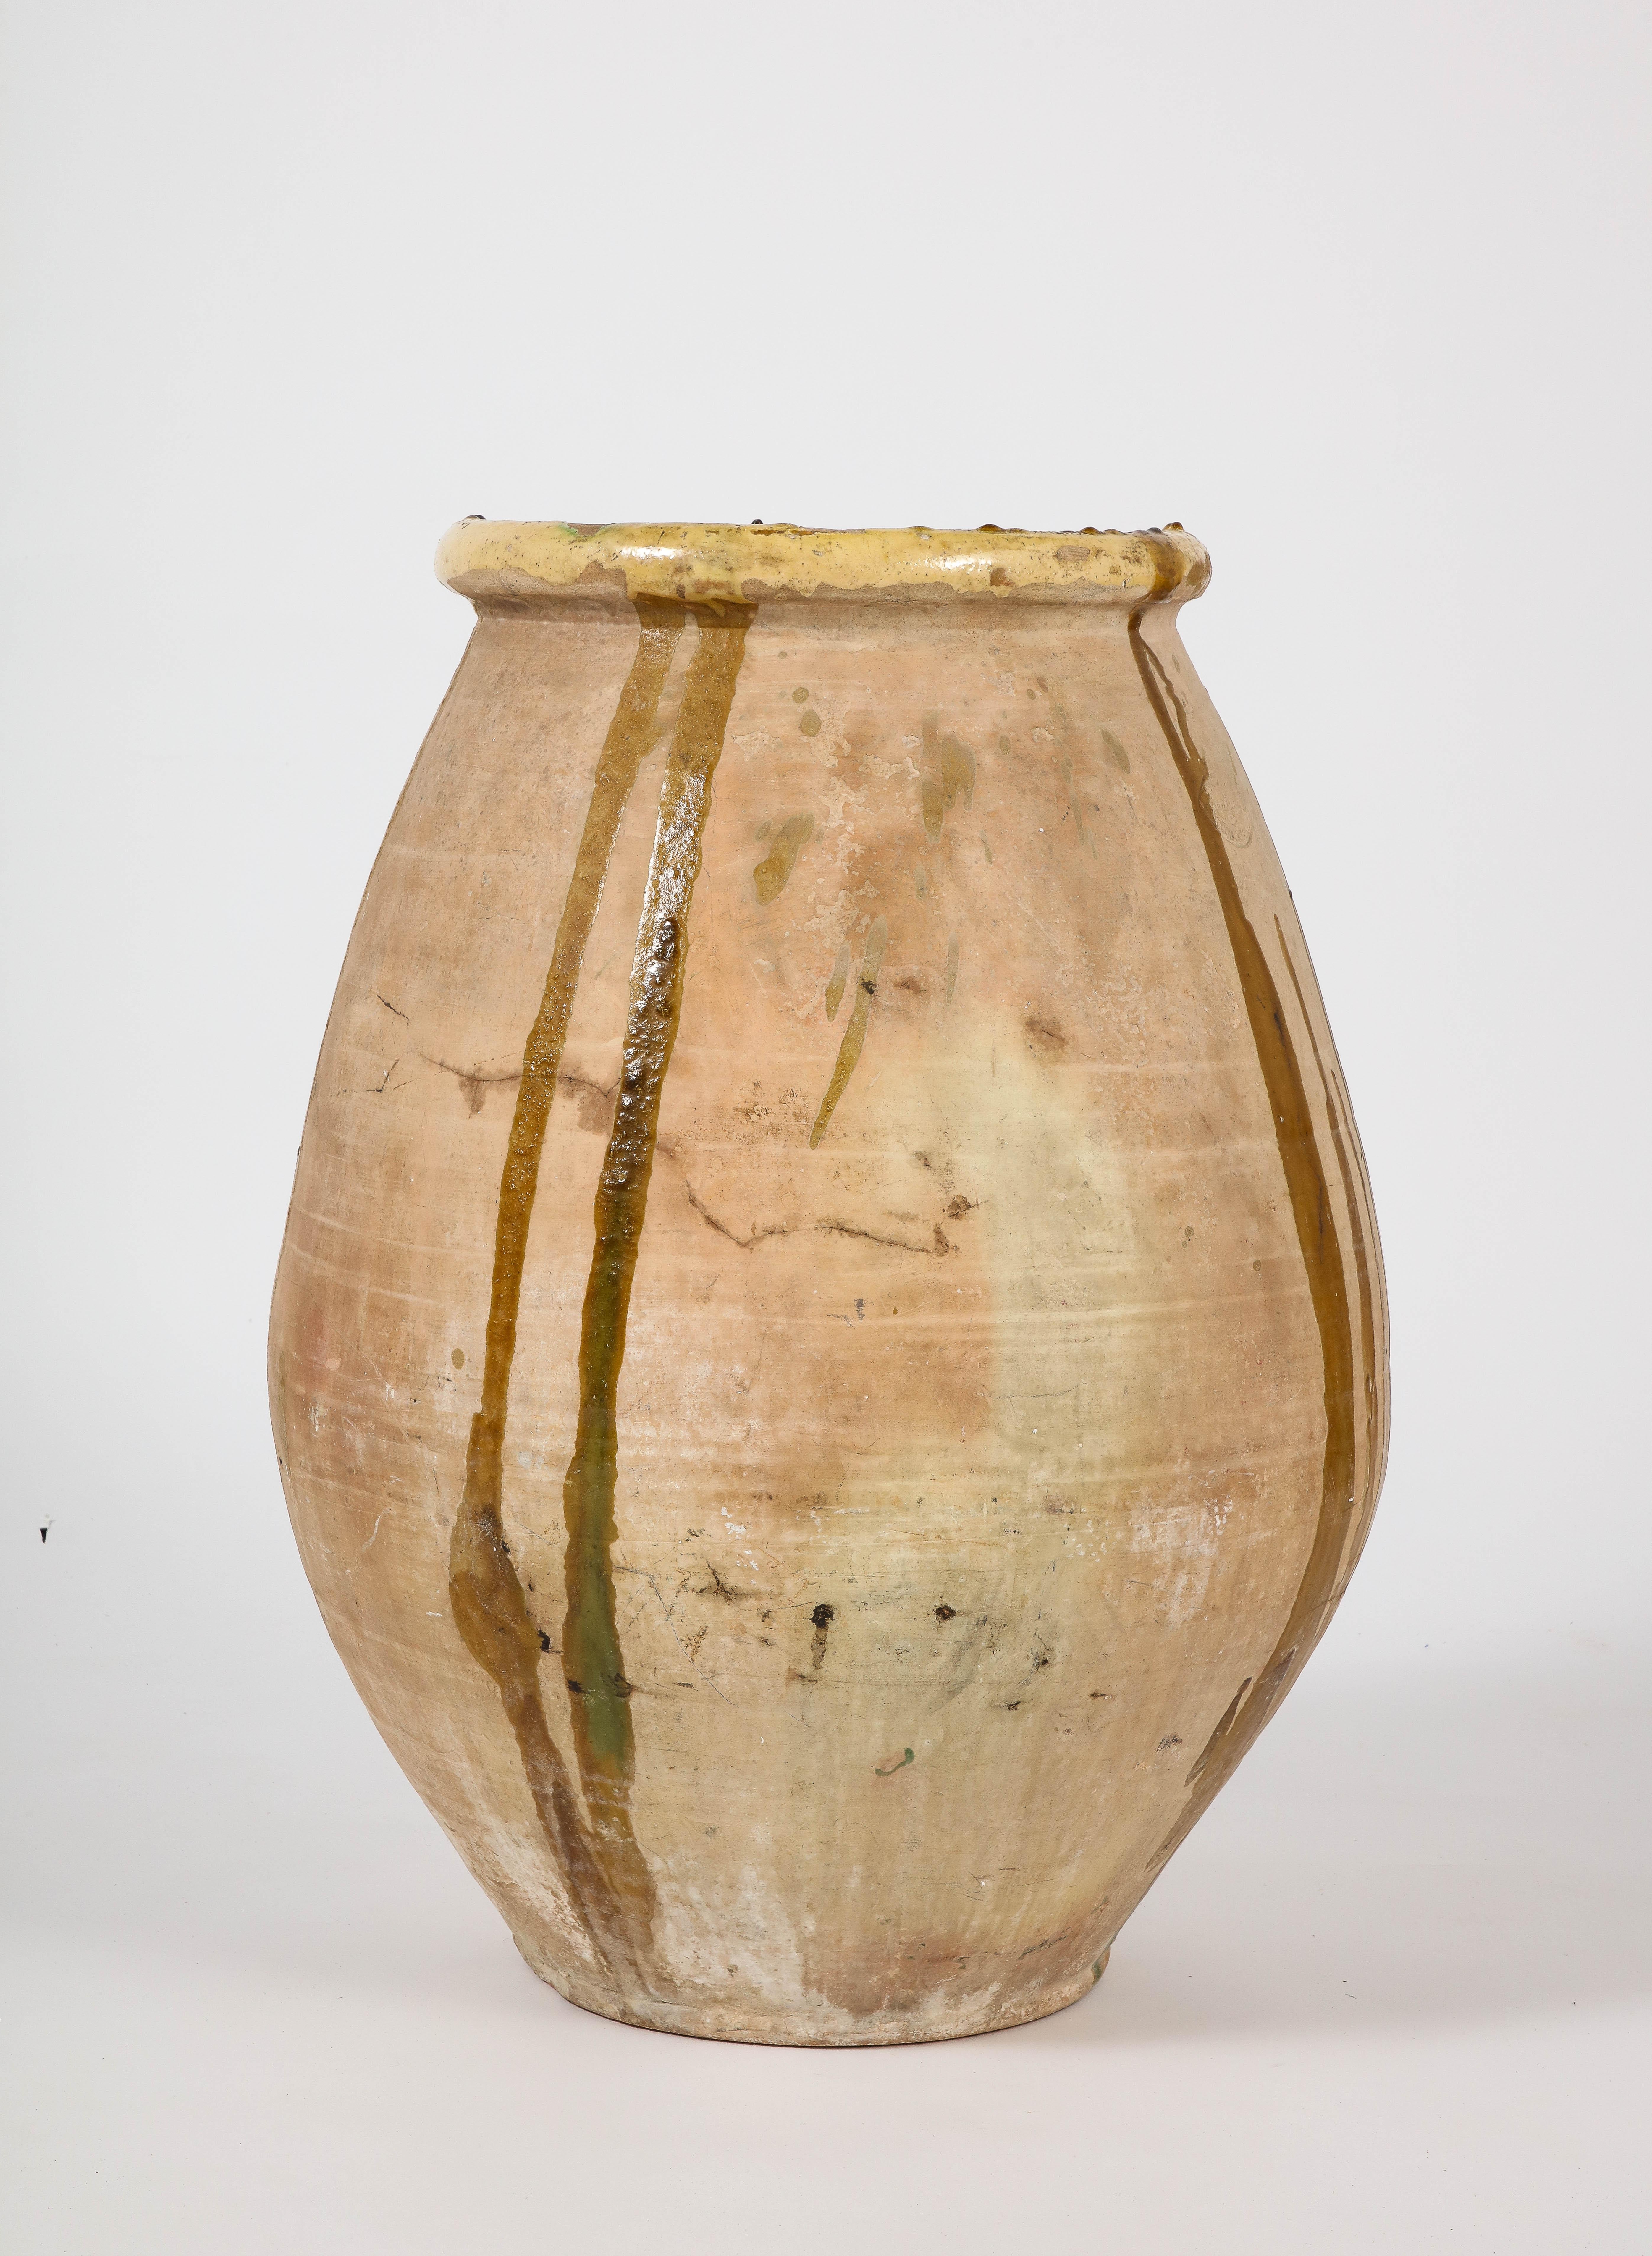 French Provincial 18th Century Terracotta Olive Oil Biot Jar with Glaze For Sale 4